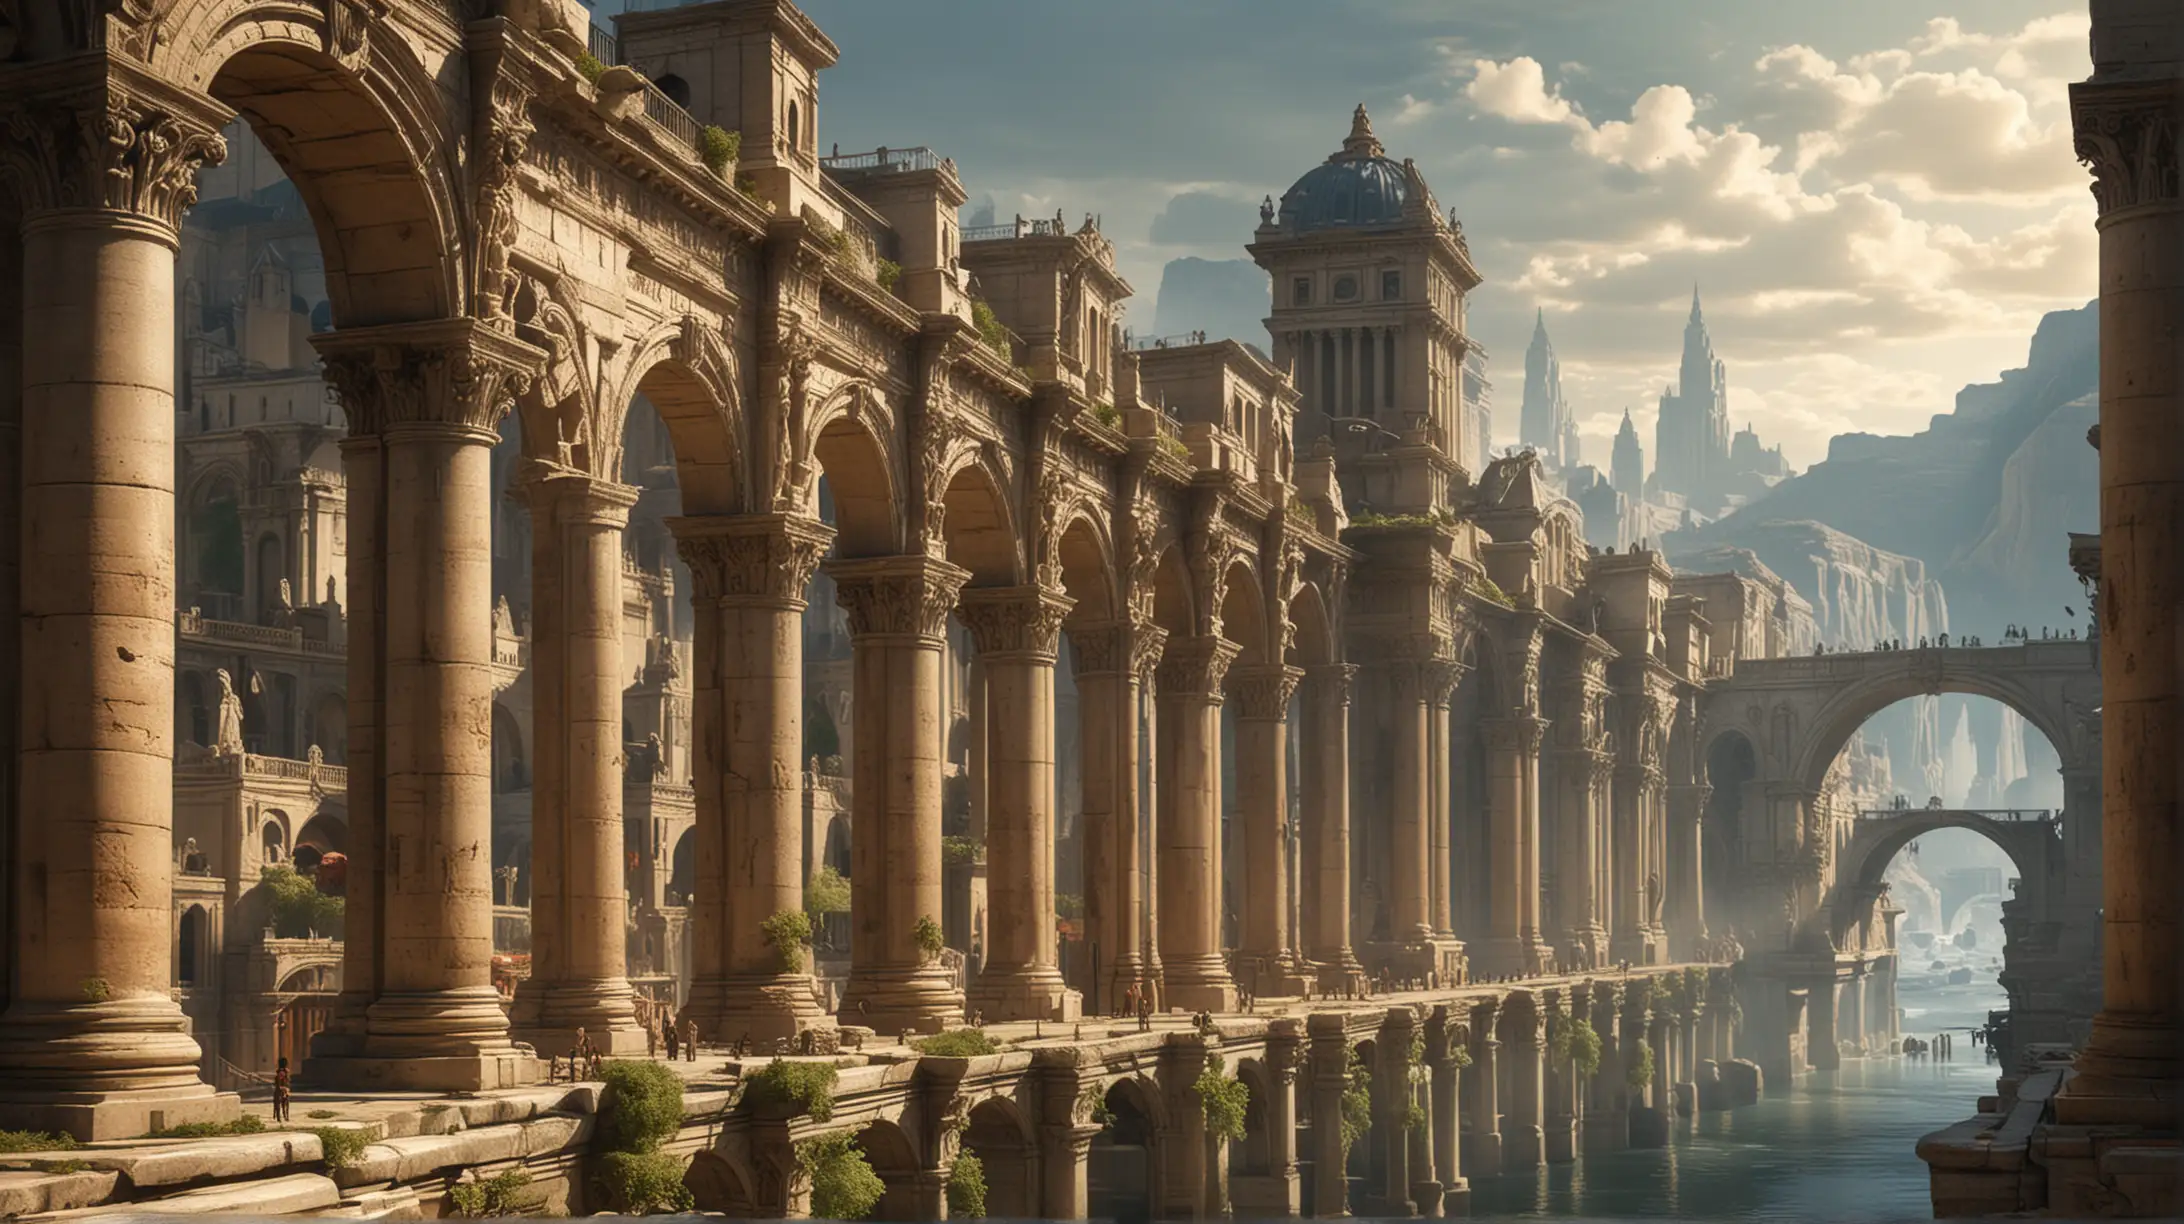 Enchanting High Fantasy Roman Cityscape with Grand Citadel and Colonnades